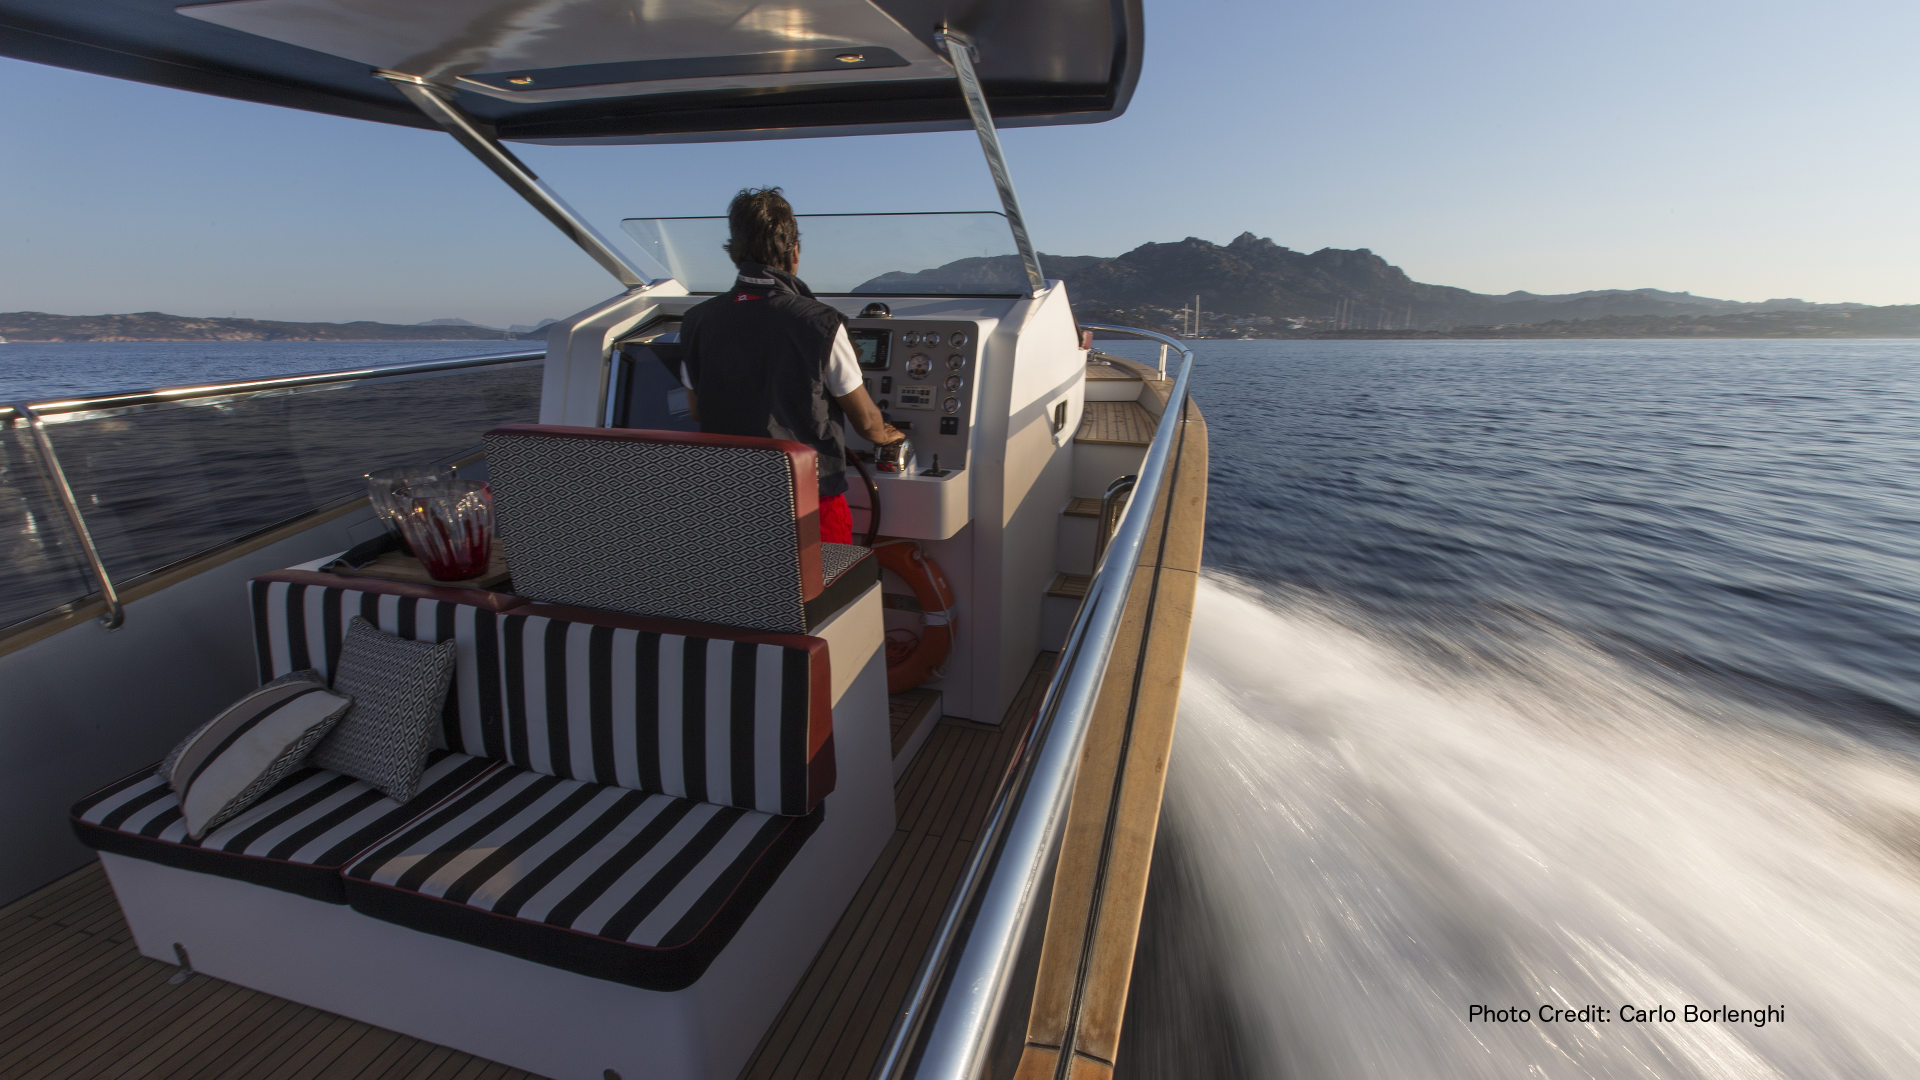 Luxi33, the Ultimate Solar Day-cruiser